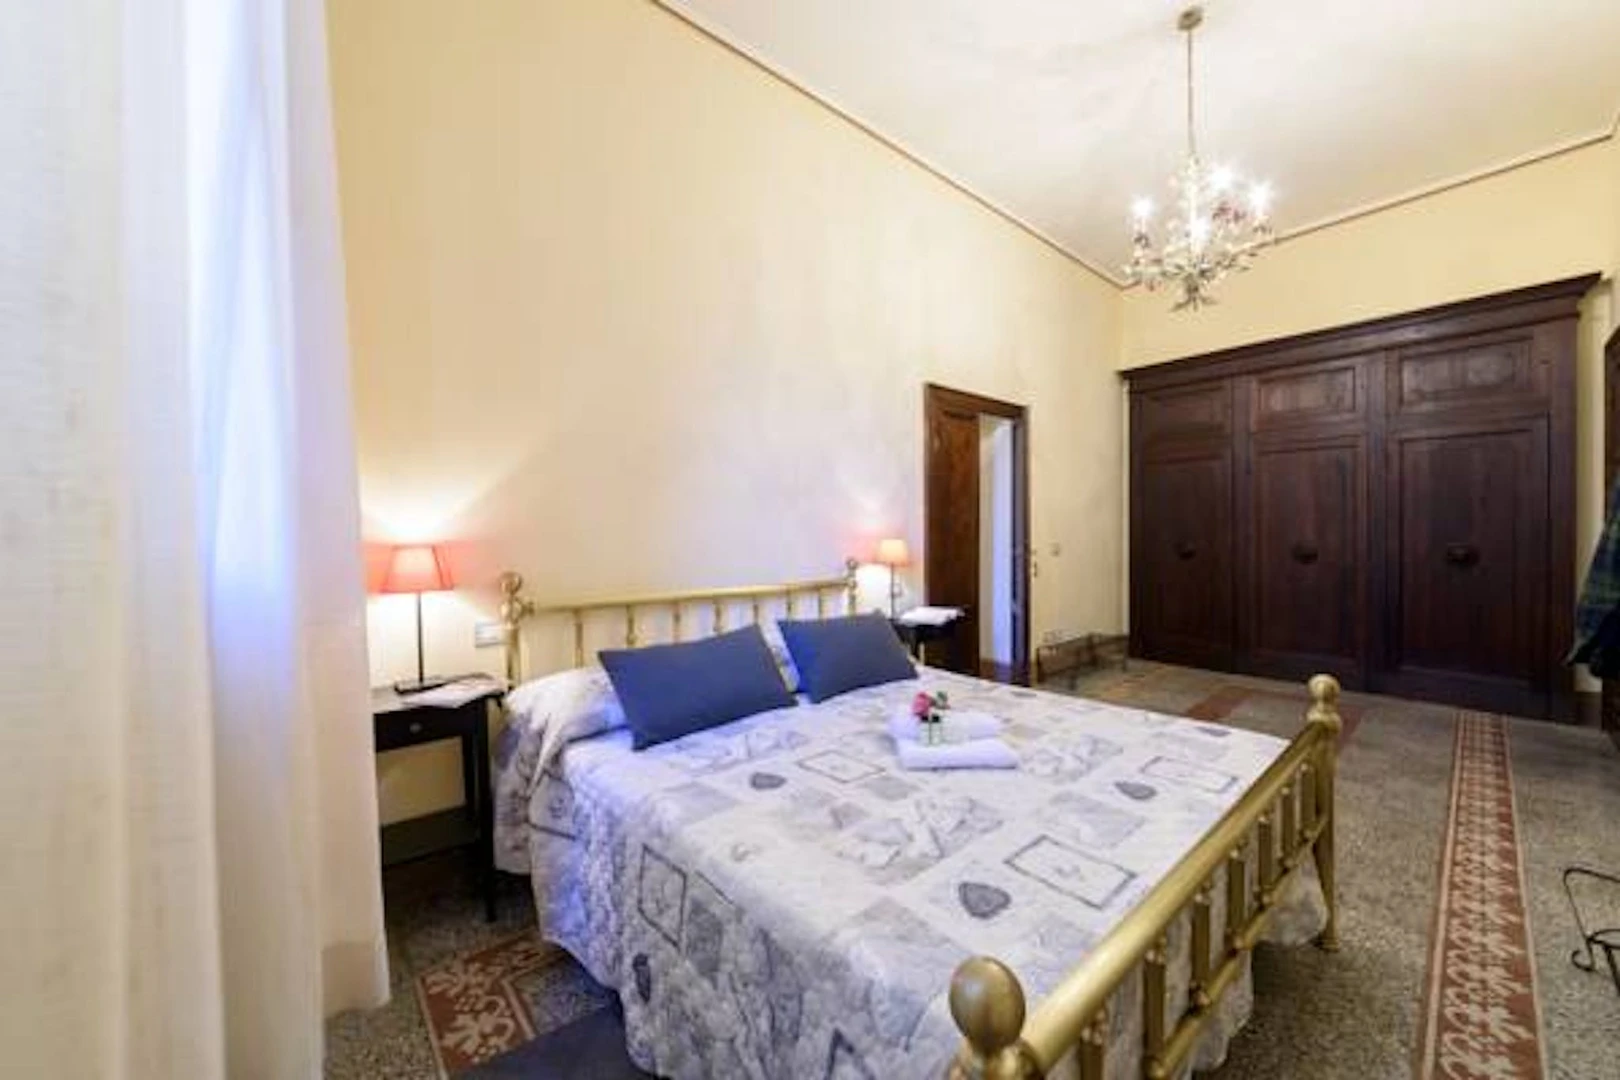 Room for rent with double bed Siena